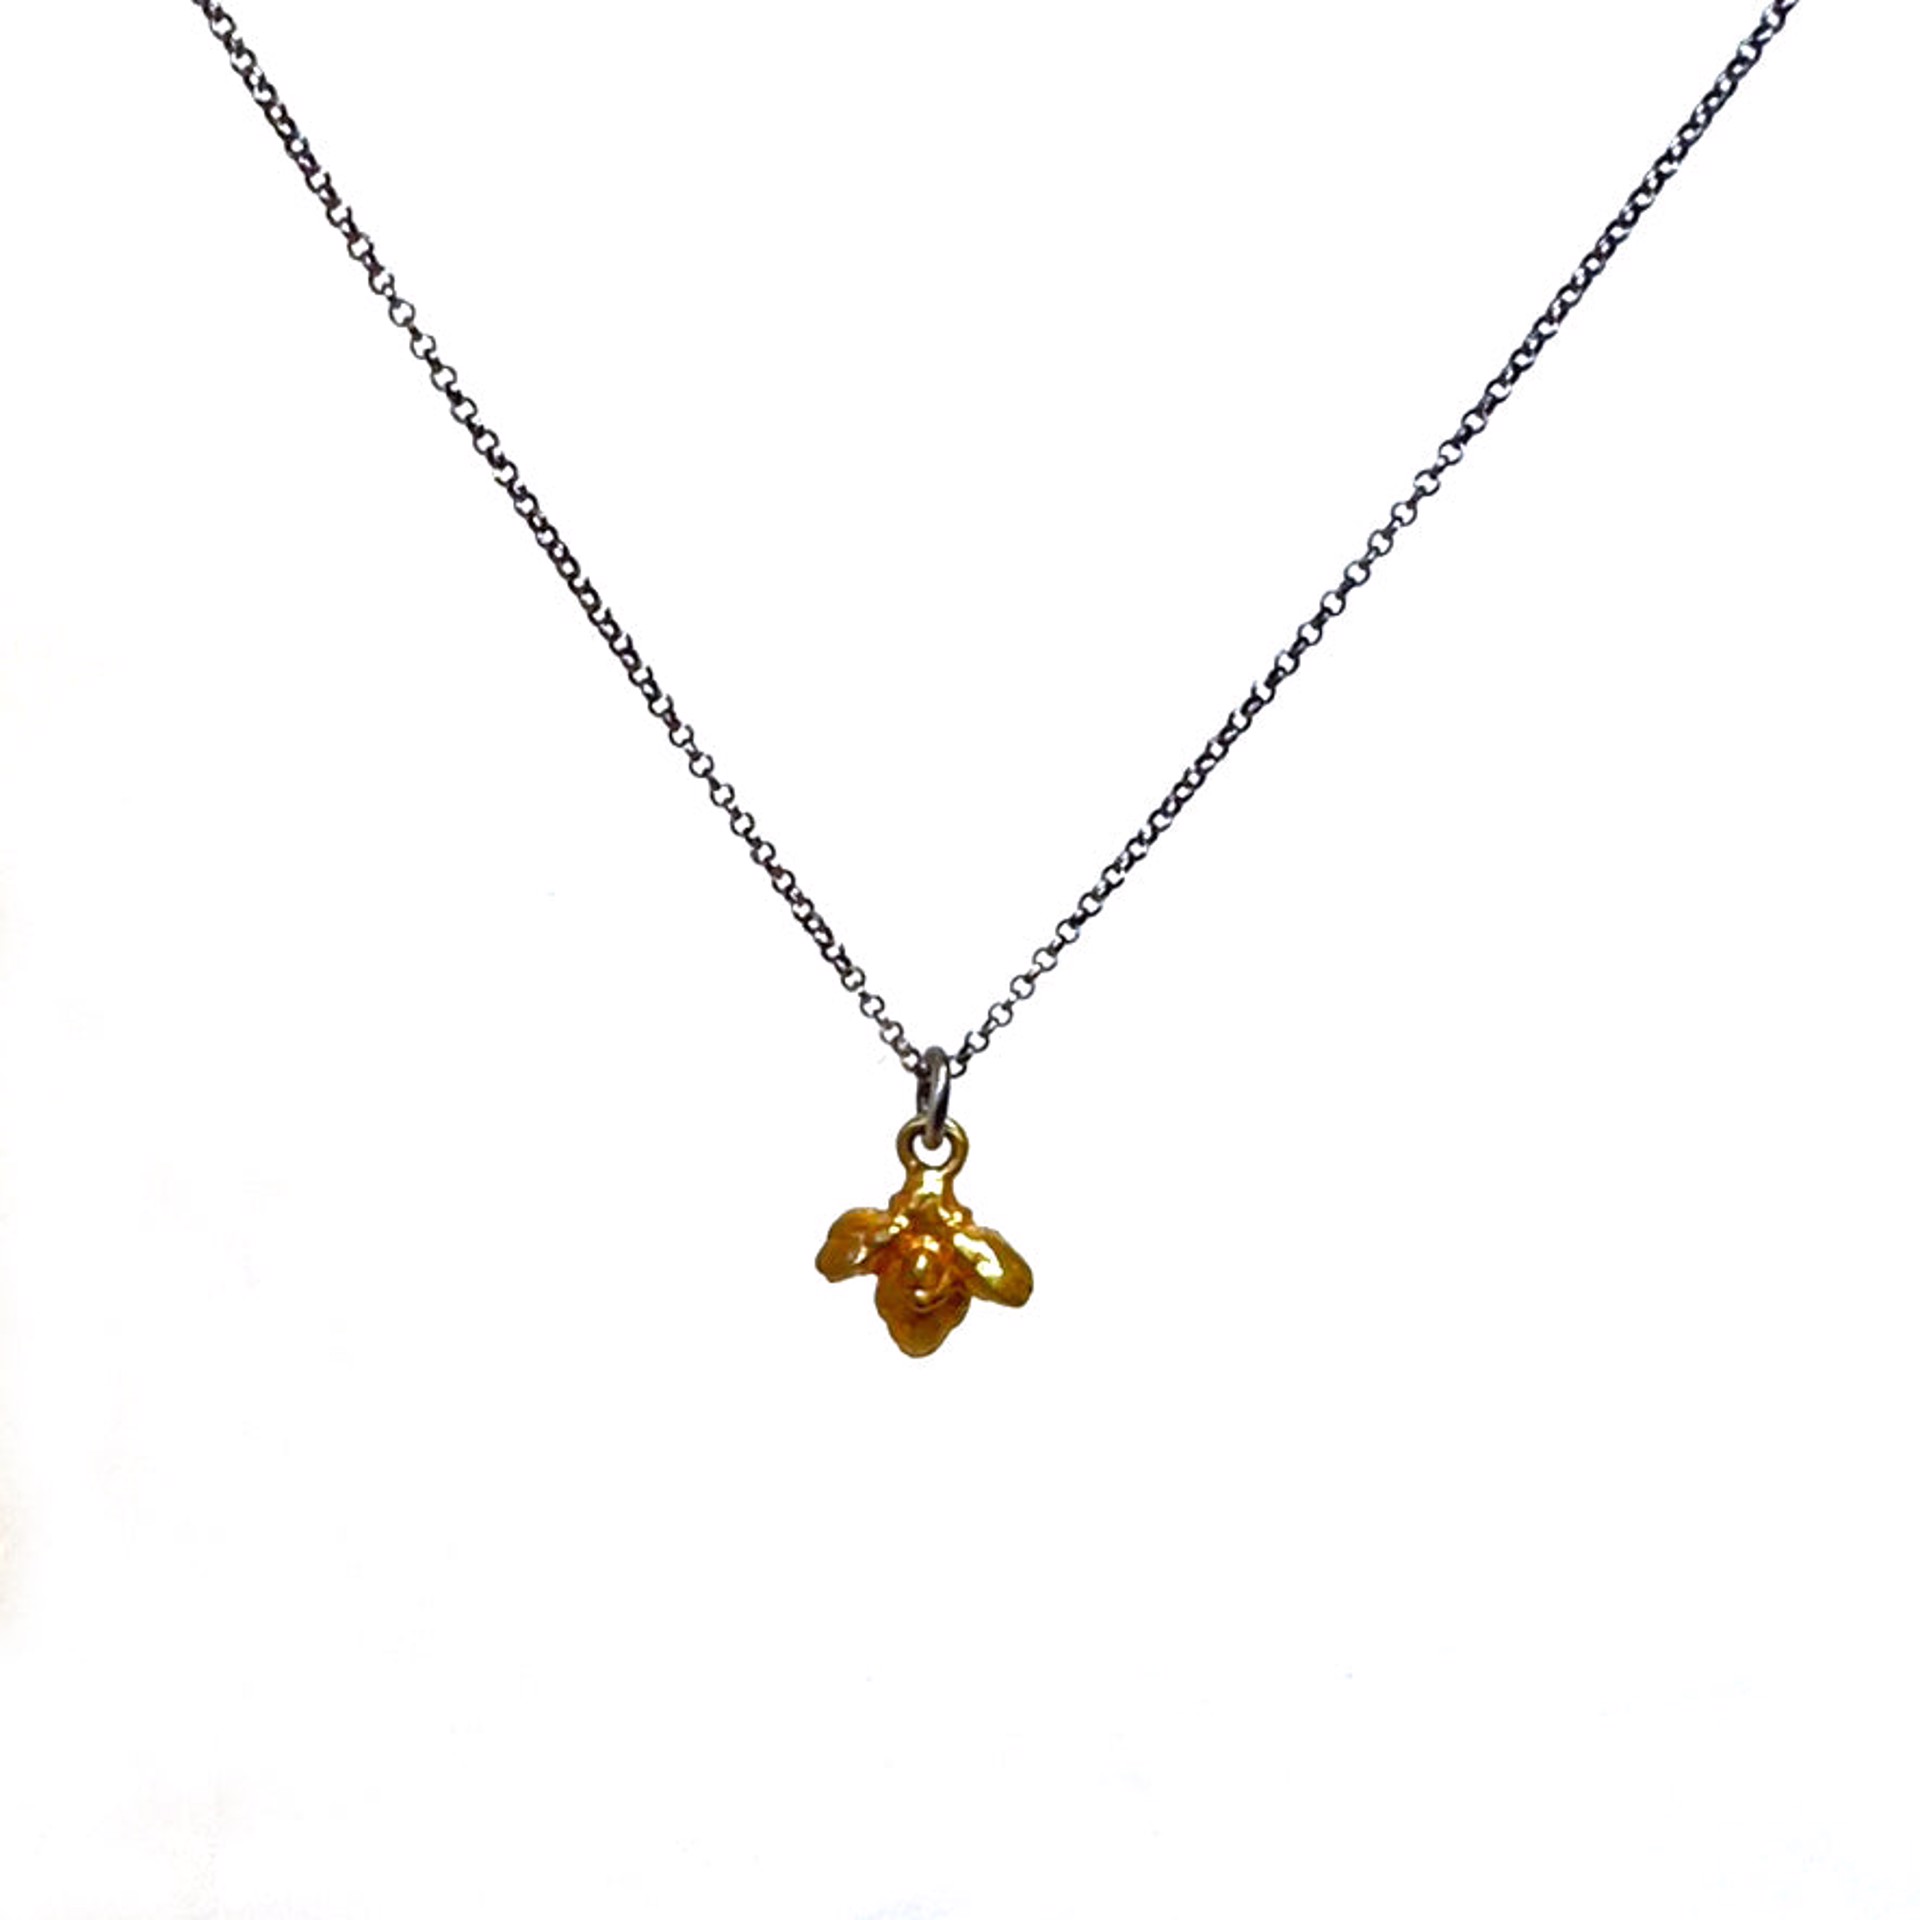 Lilac Blossom Pendant With 24k Gold by Sara Thompson